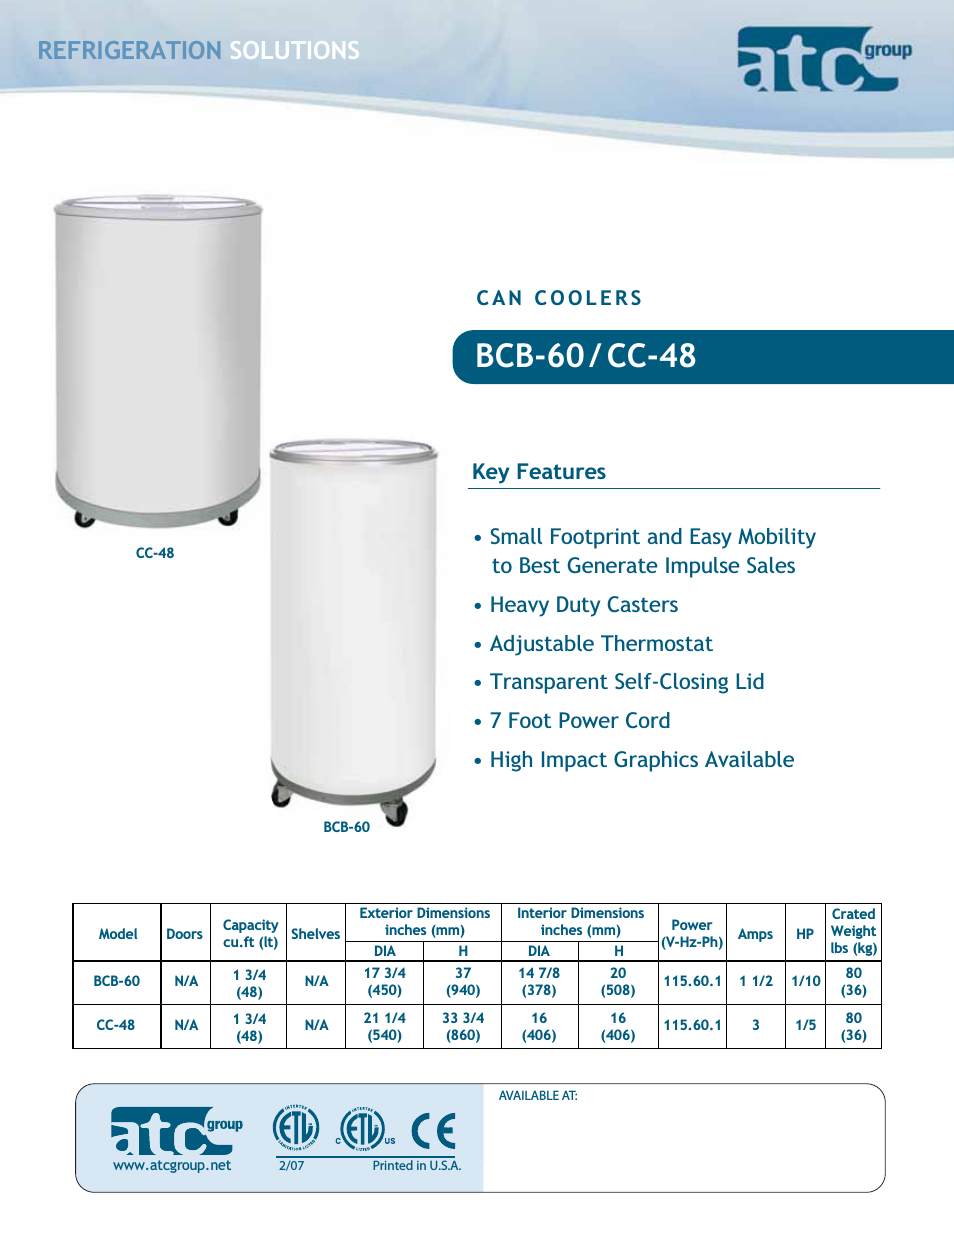 Can Coolers BCB-60